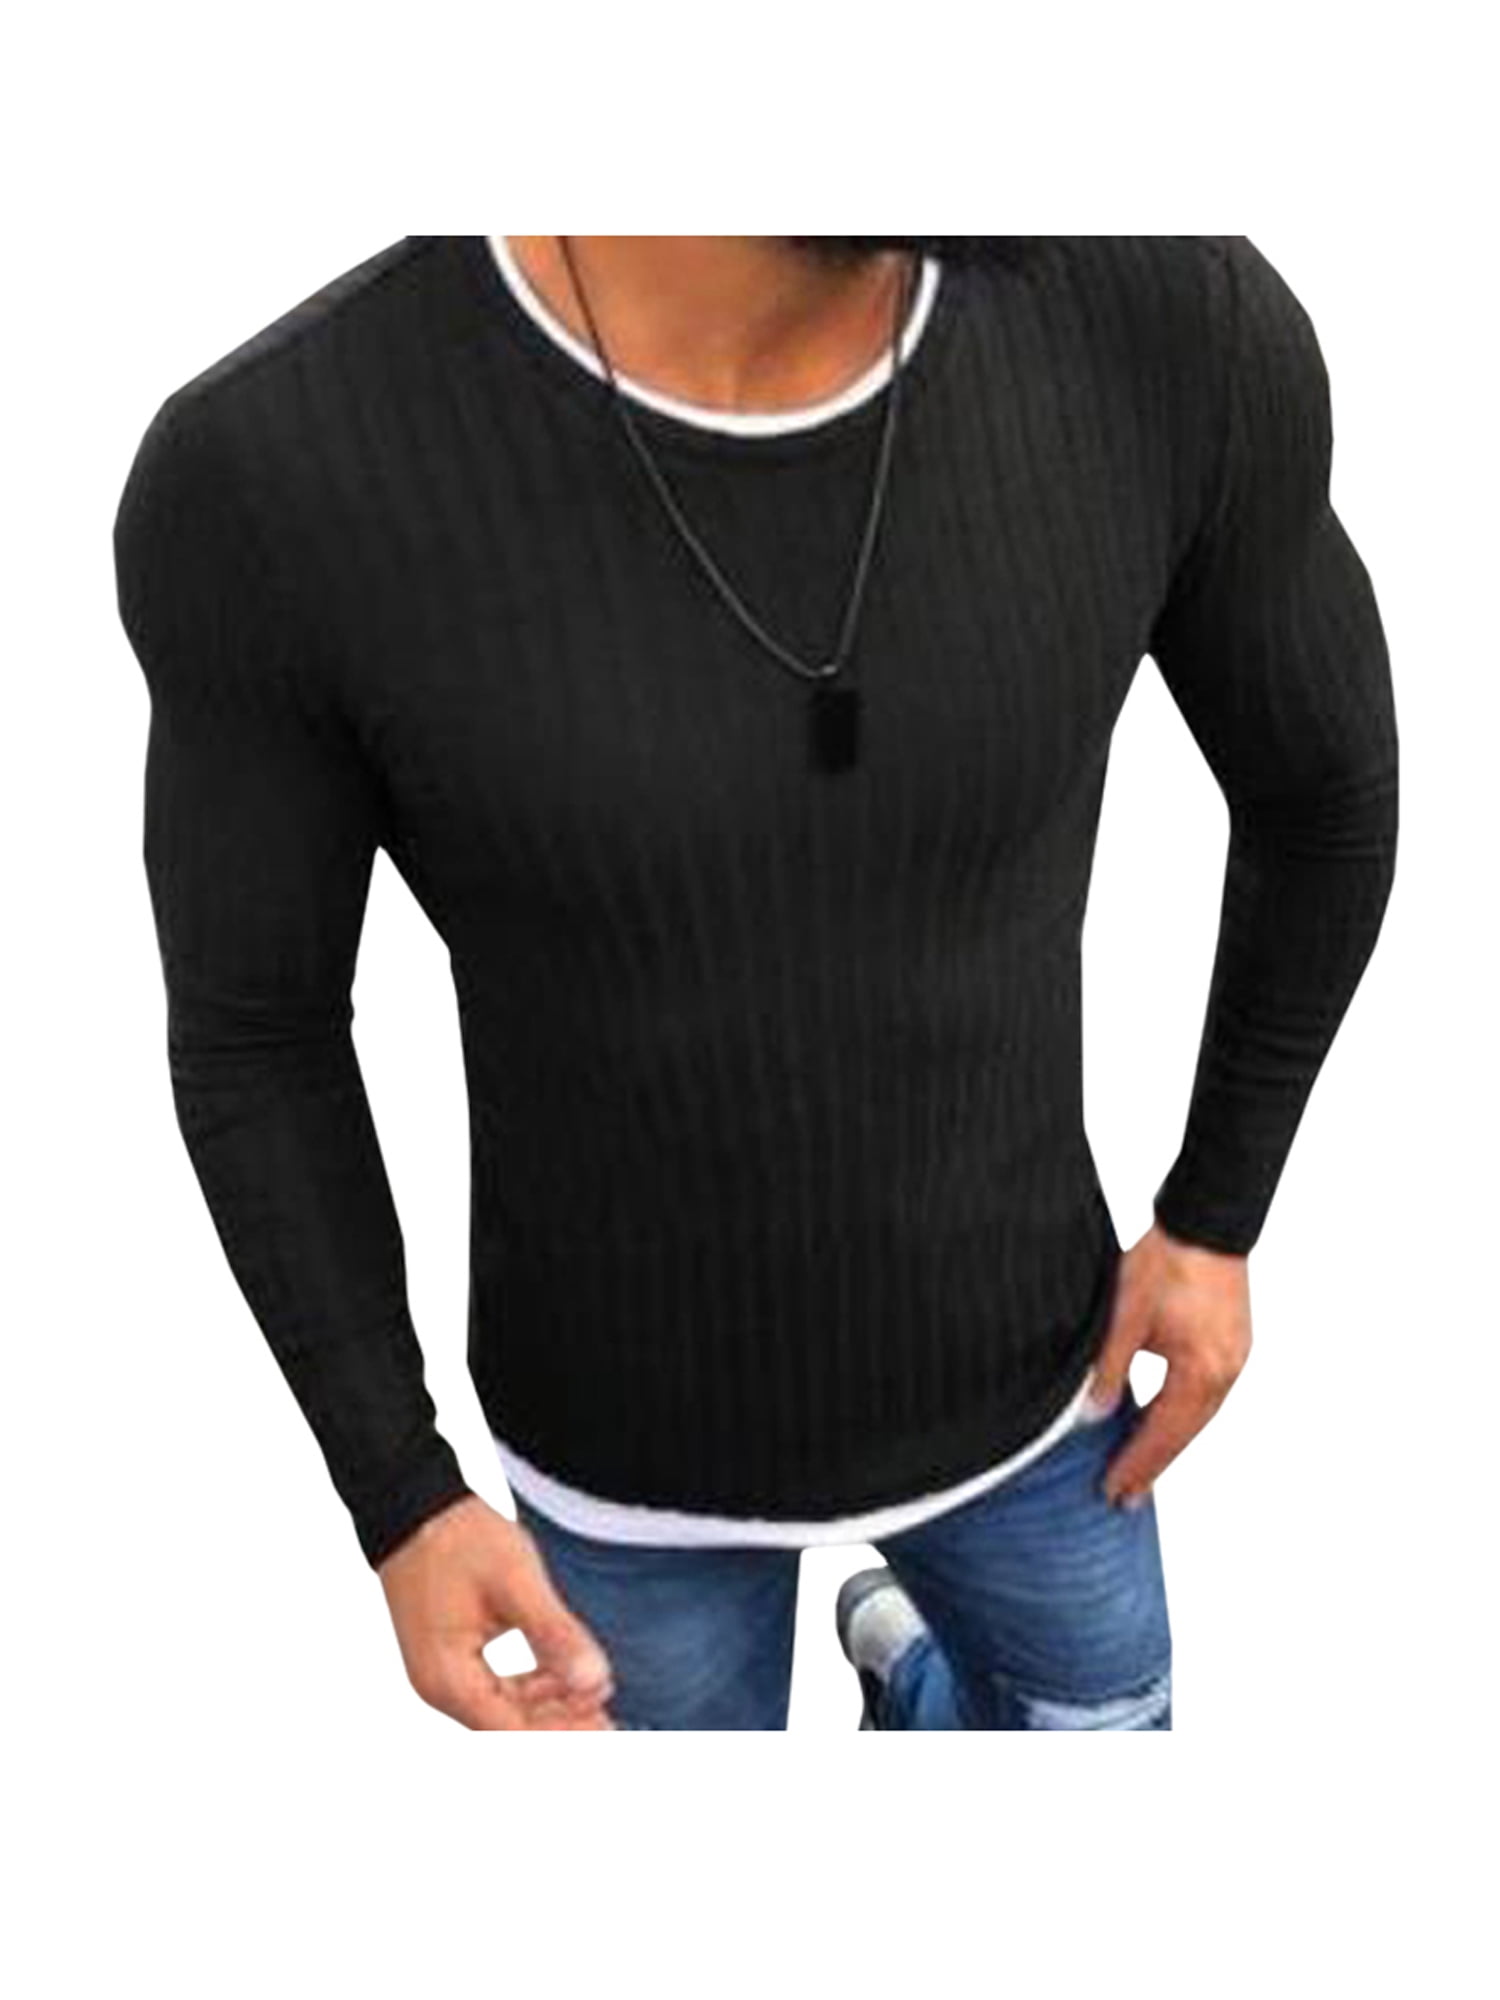 Men V Neck Jumper Long Sleeve Knit Tops Muscle Fit T Shirt Pullover Sweater Tops